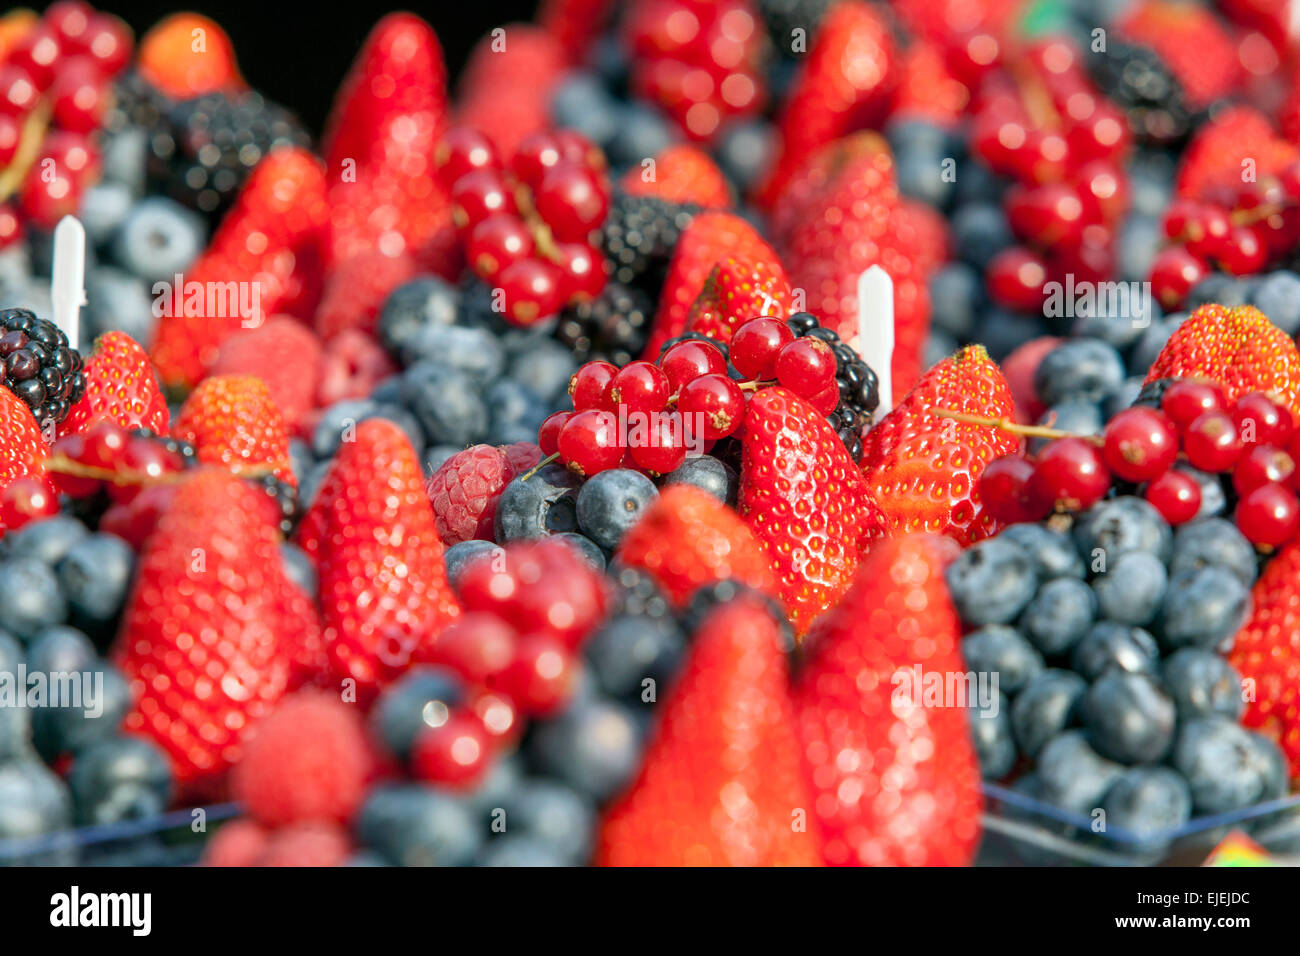 Strawberries and blueberries, mixed berries Close up Tasty Sweet fruits Stock Photo